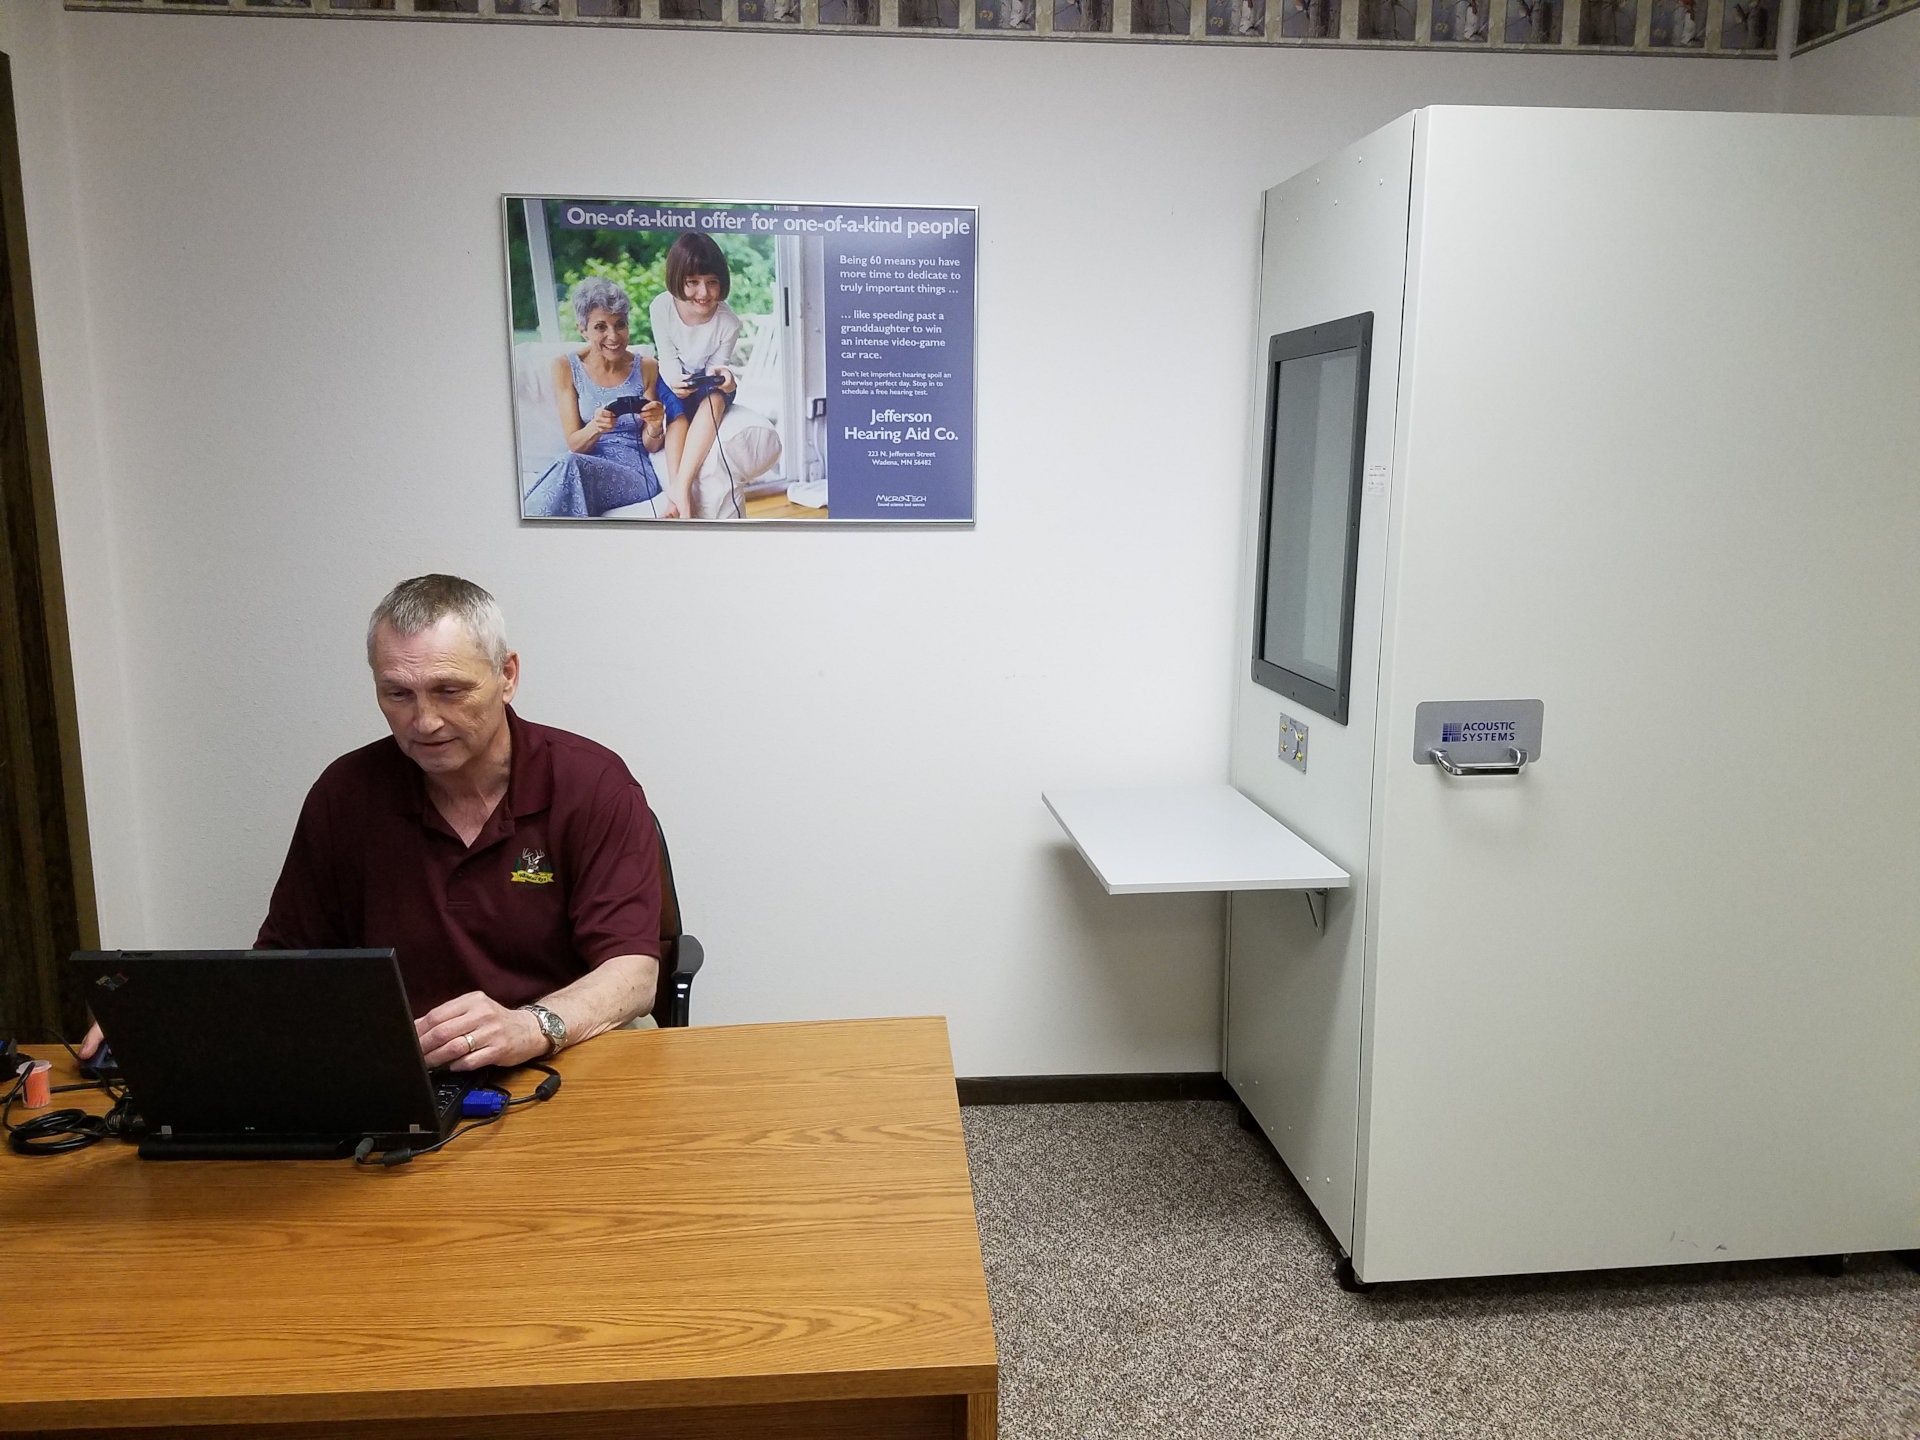 hearing specialist working at laptop with hearing test booth visible in background